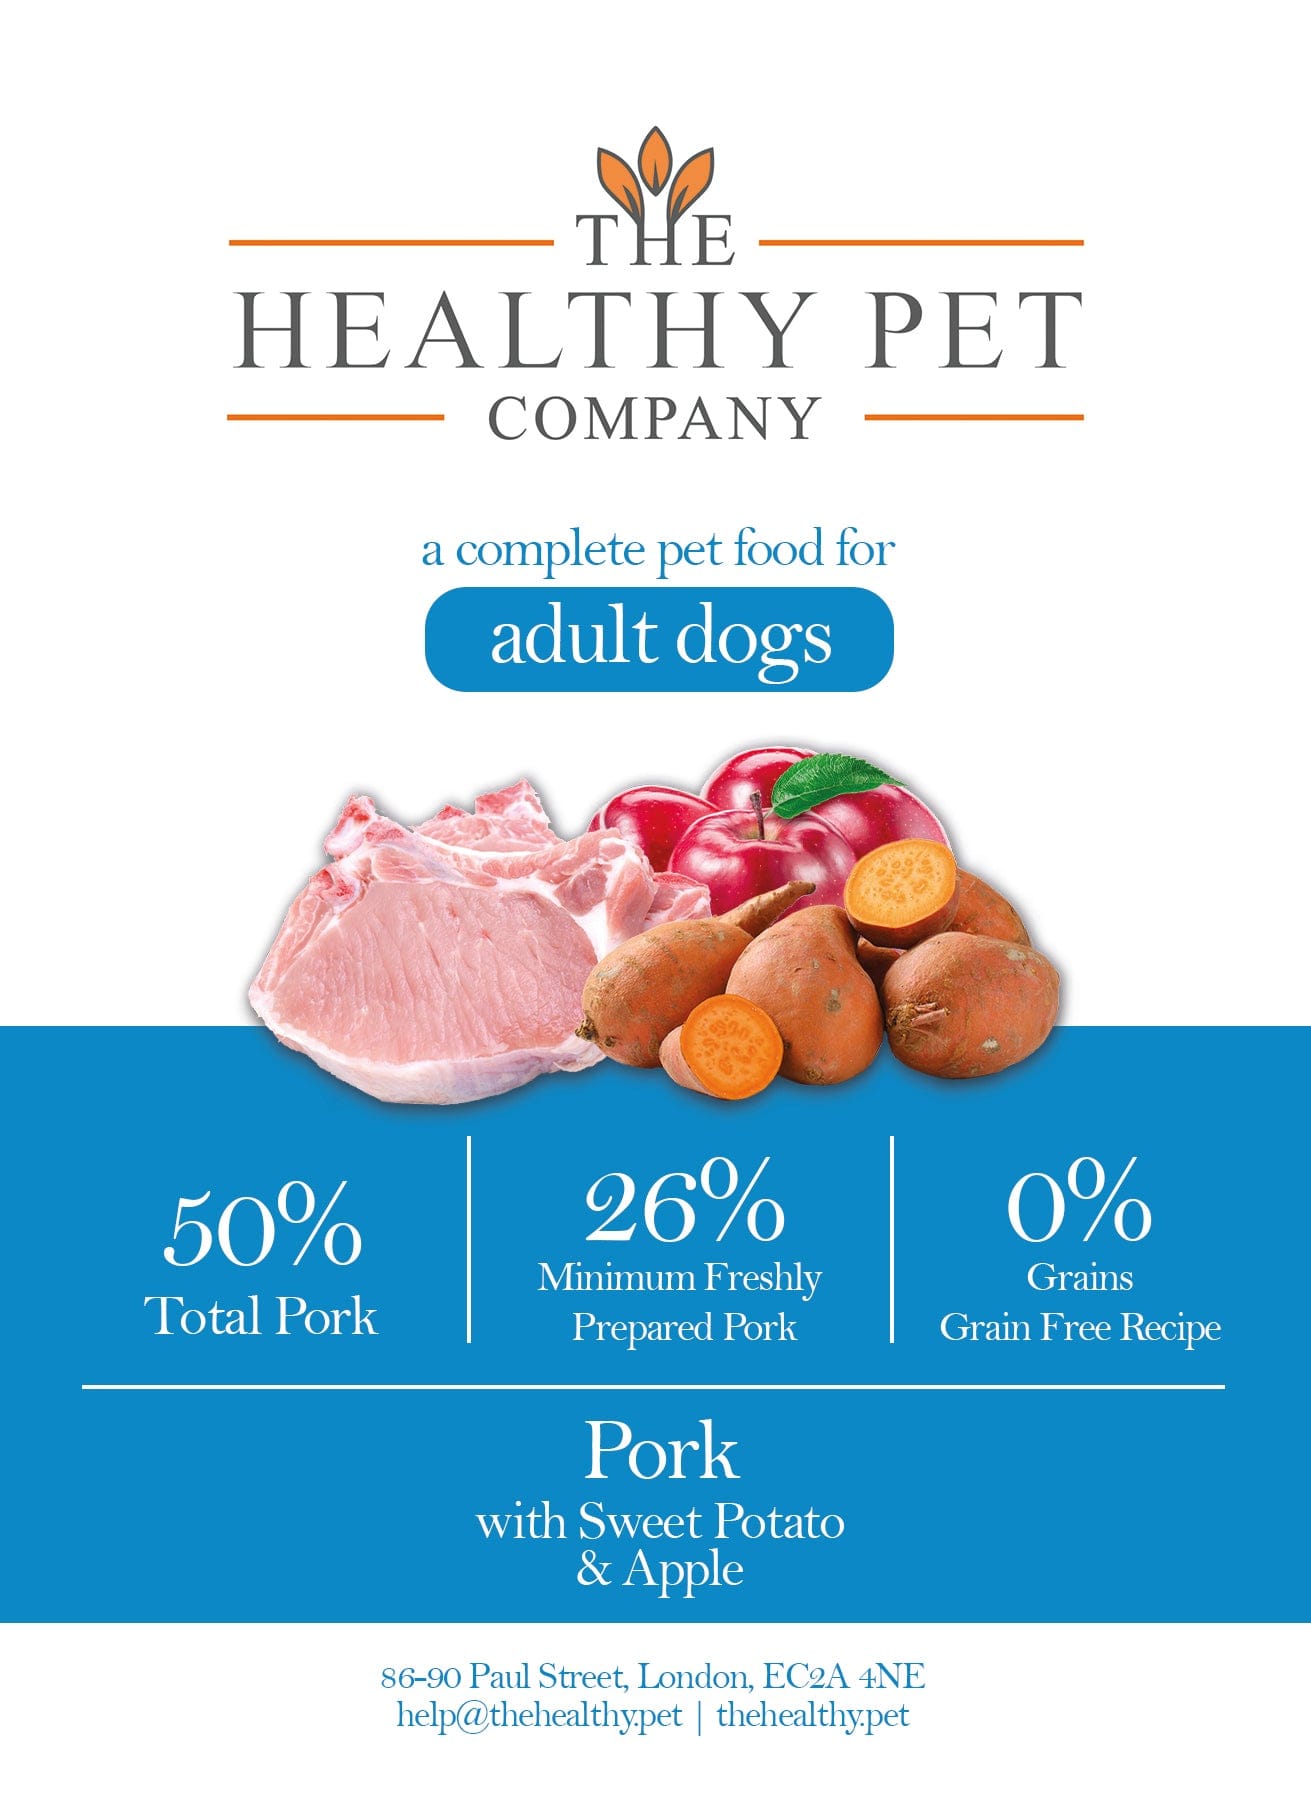 The Healthy Pet Company Complete Meal - Pork with Sweet Potato for Adult Dogs - The Healthy Pet Company